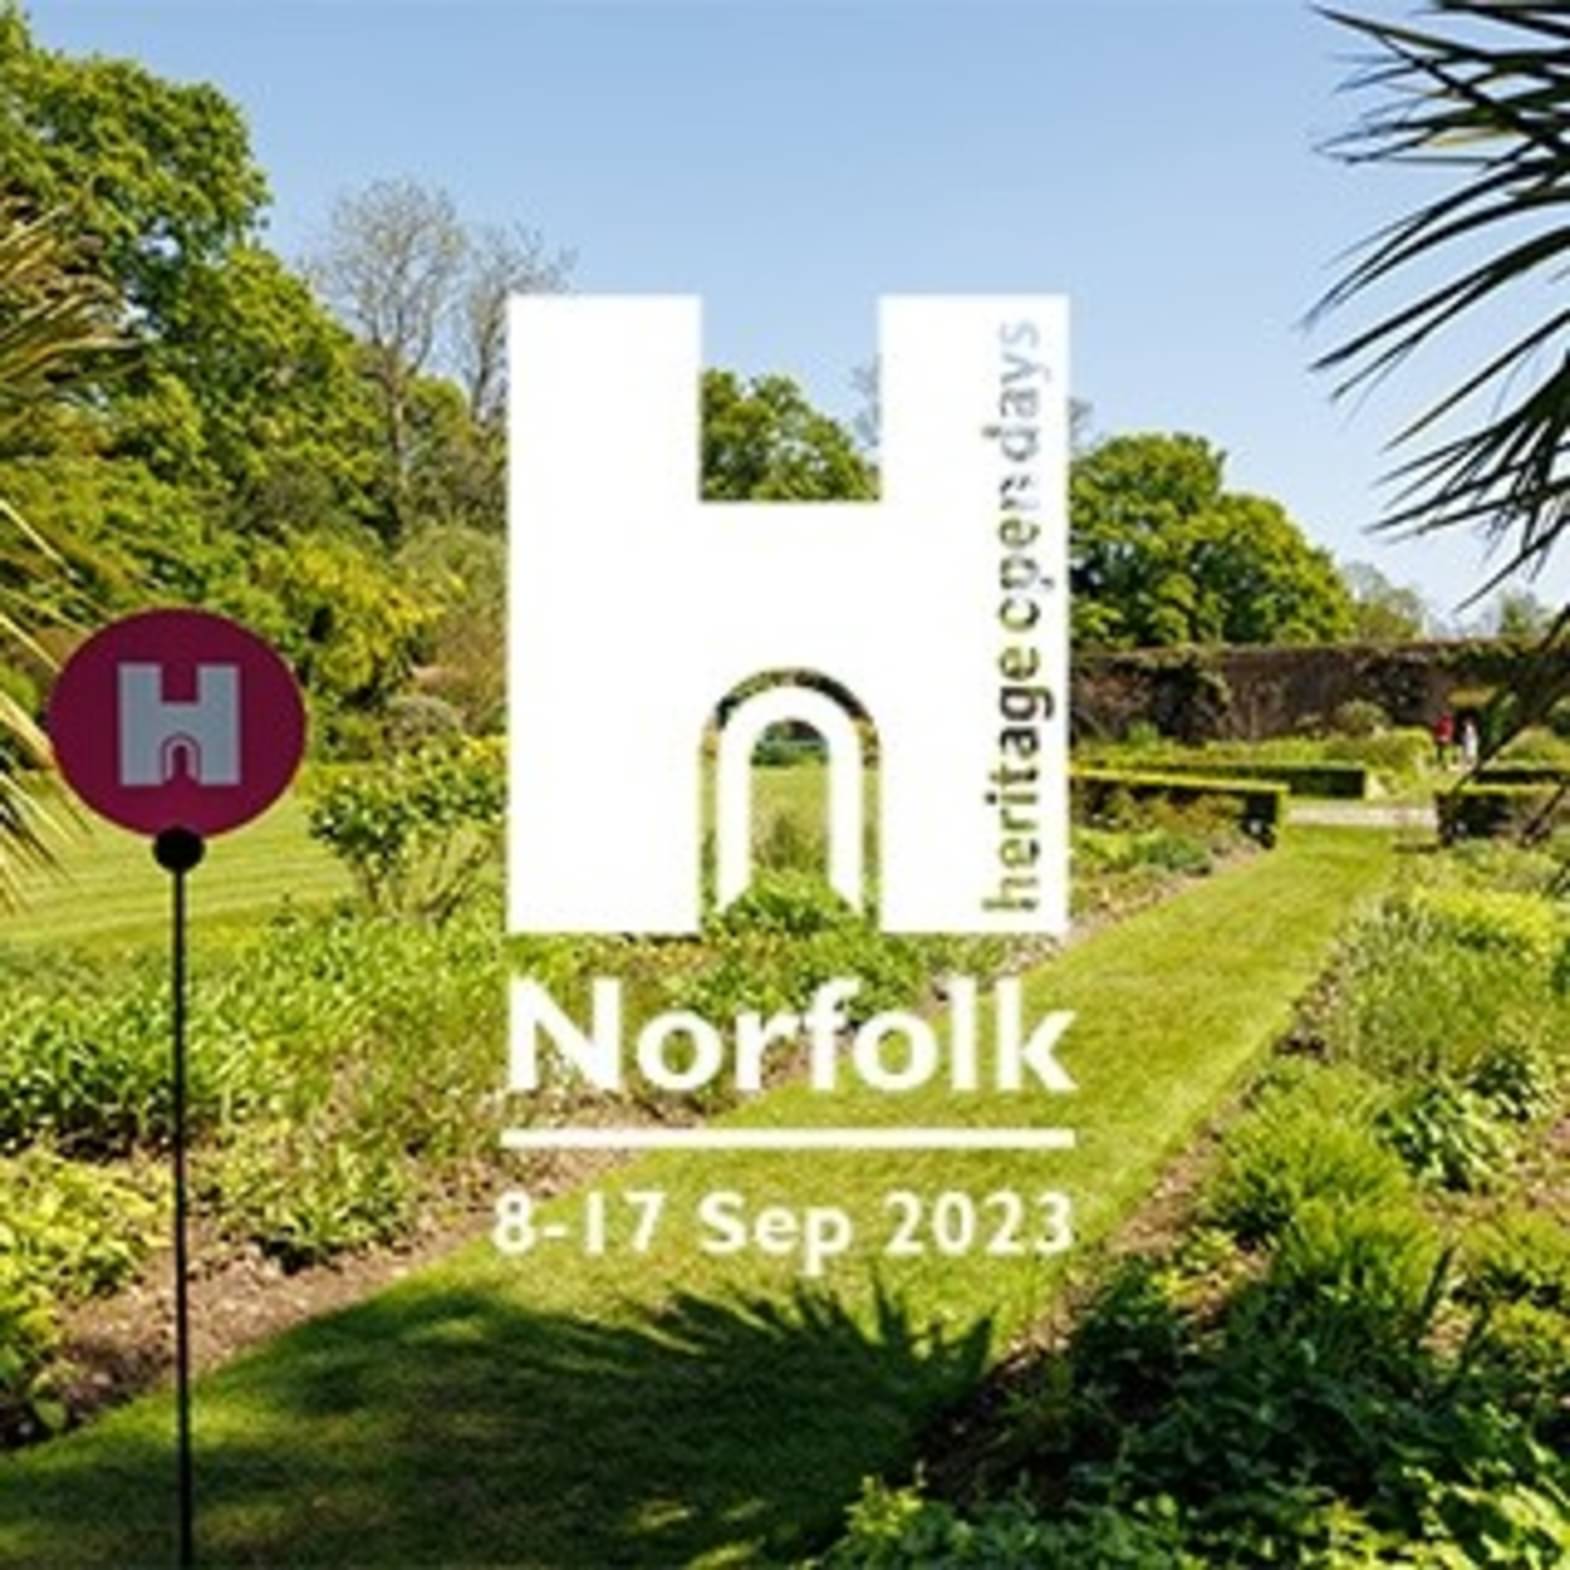 Norfolk Heritage Open Days, Many Venues, Many Villages, Town & Cities, Norfolk,   | With nearly 300 events taking place across the county, there's plenty to explore! From immersive experiences, to exclusive behind-the-scenes tours, to amazing exhibitions, there's something for everybody. | heritage, open, days